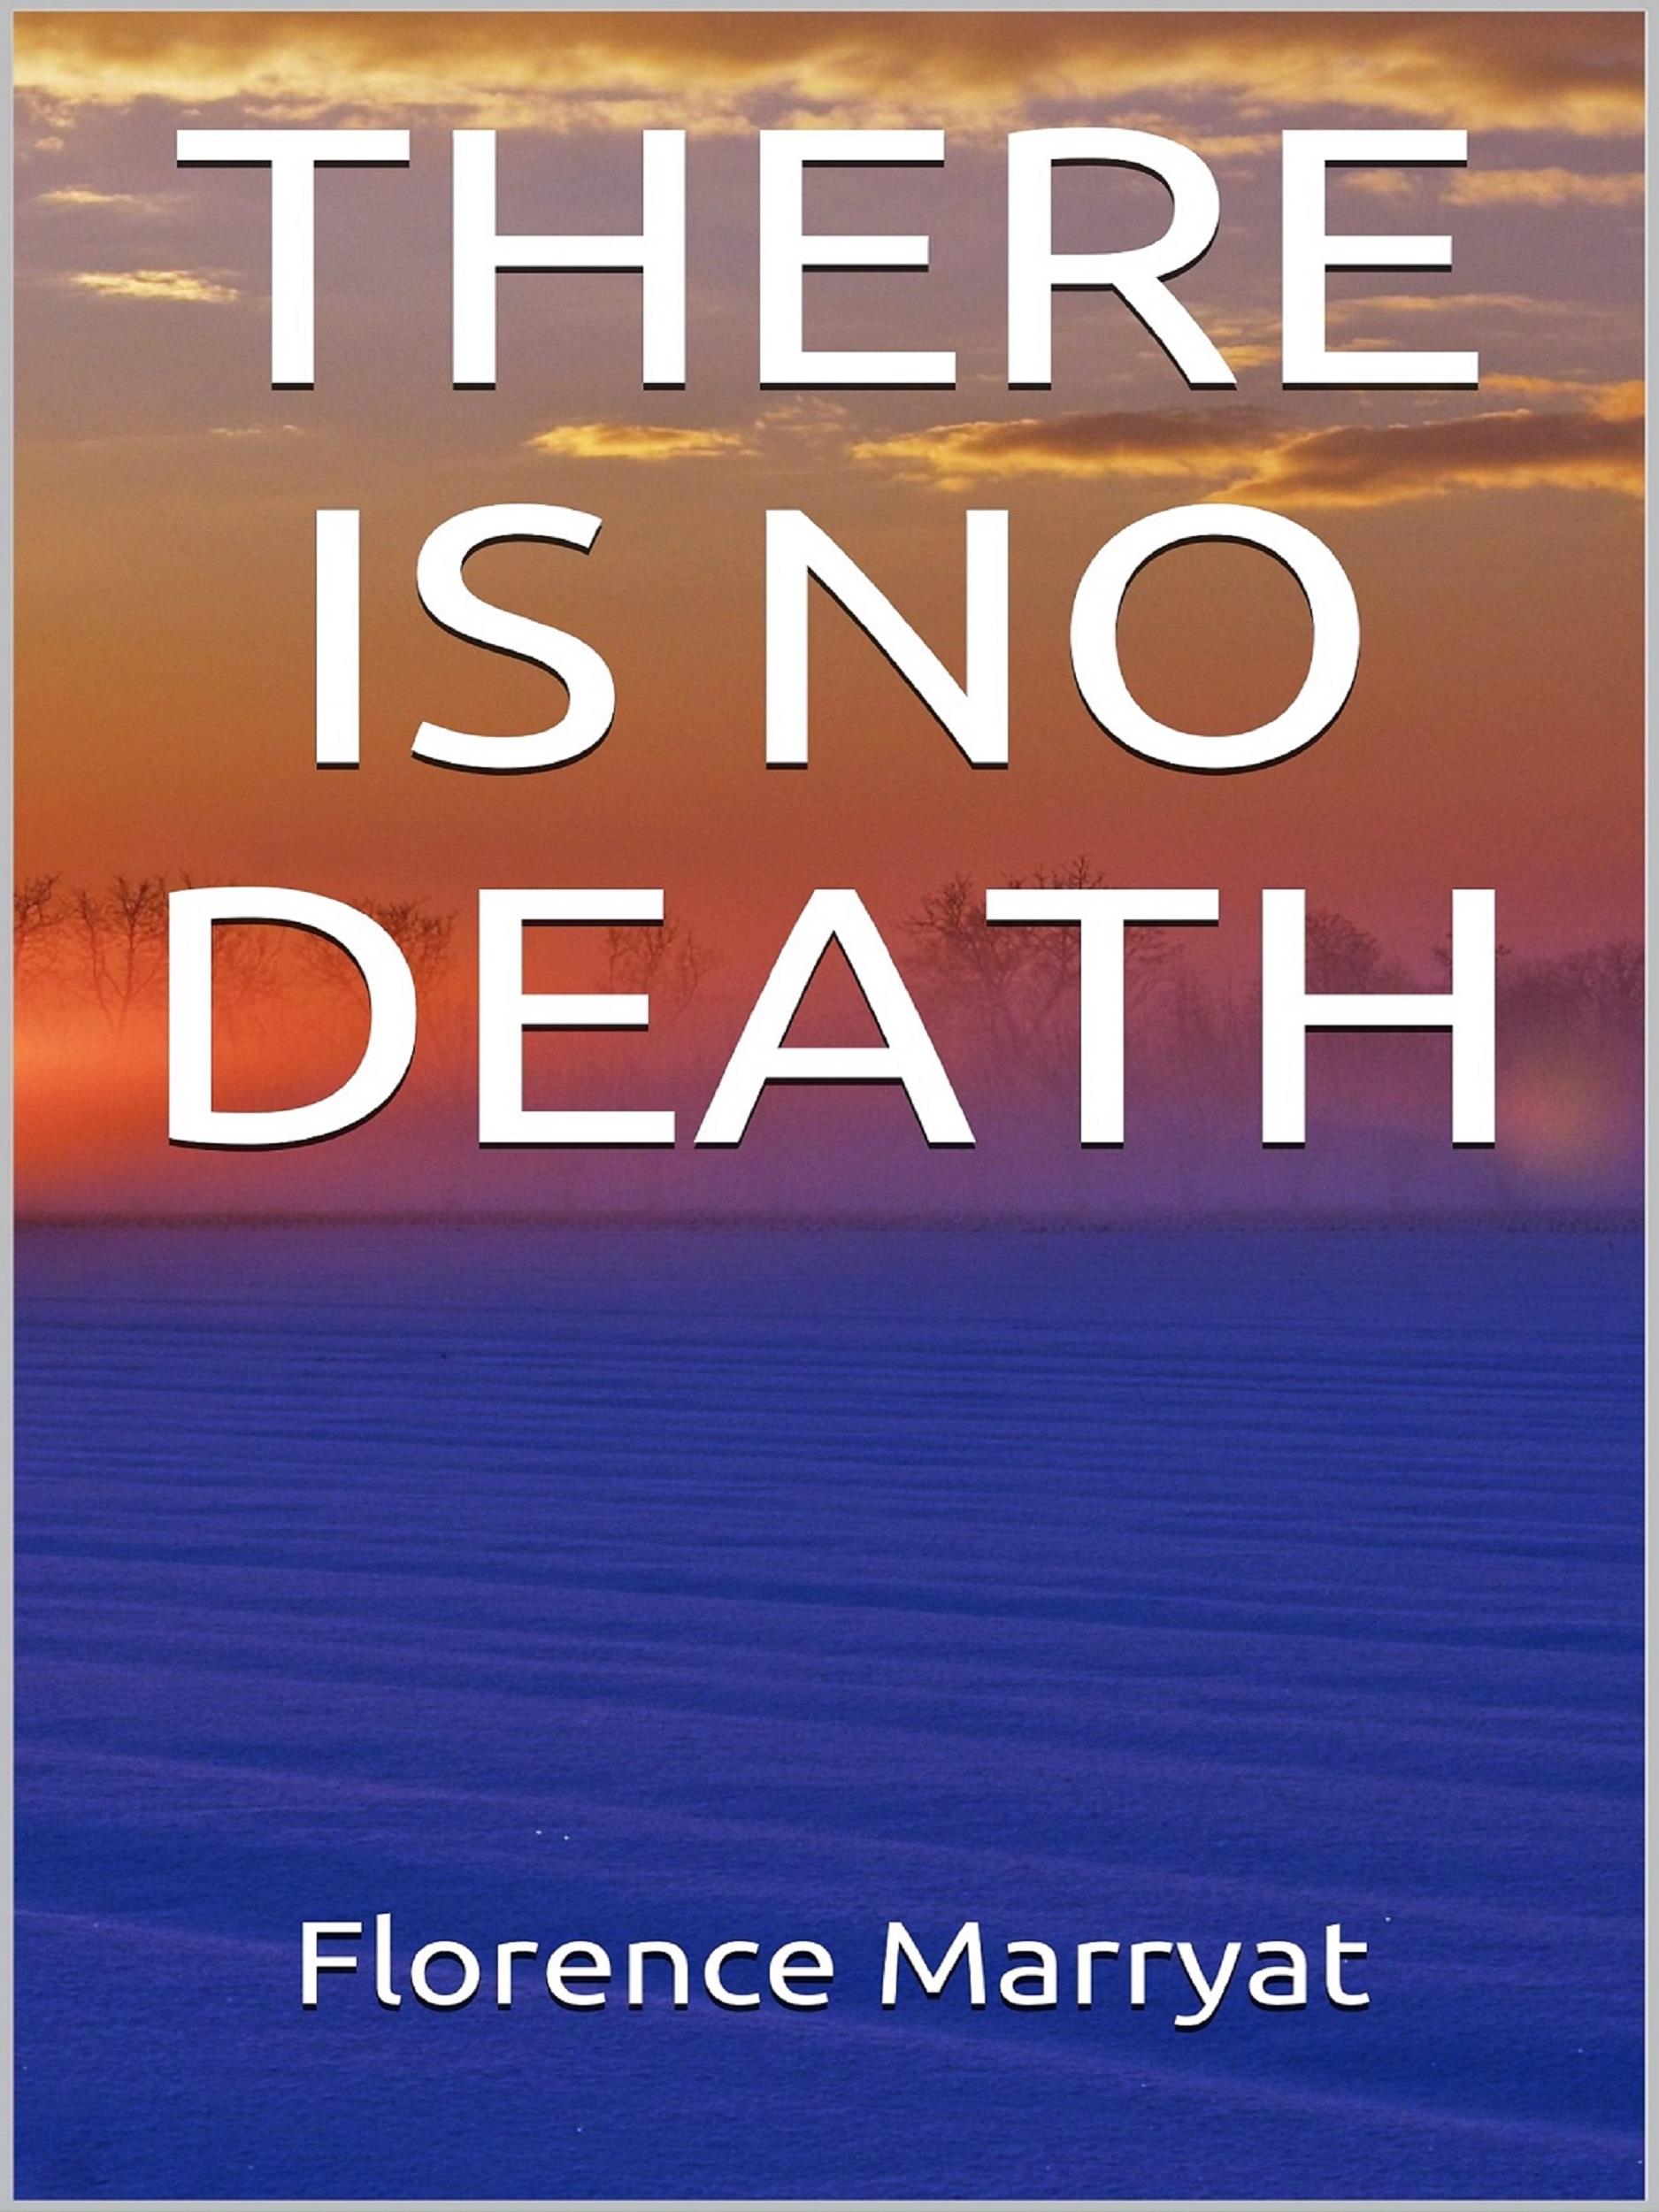 There is no death